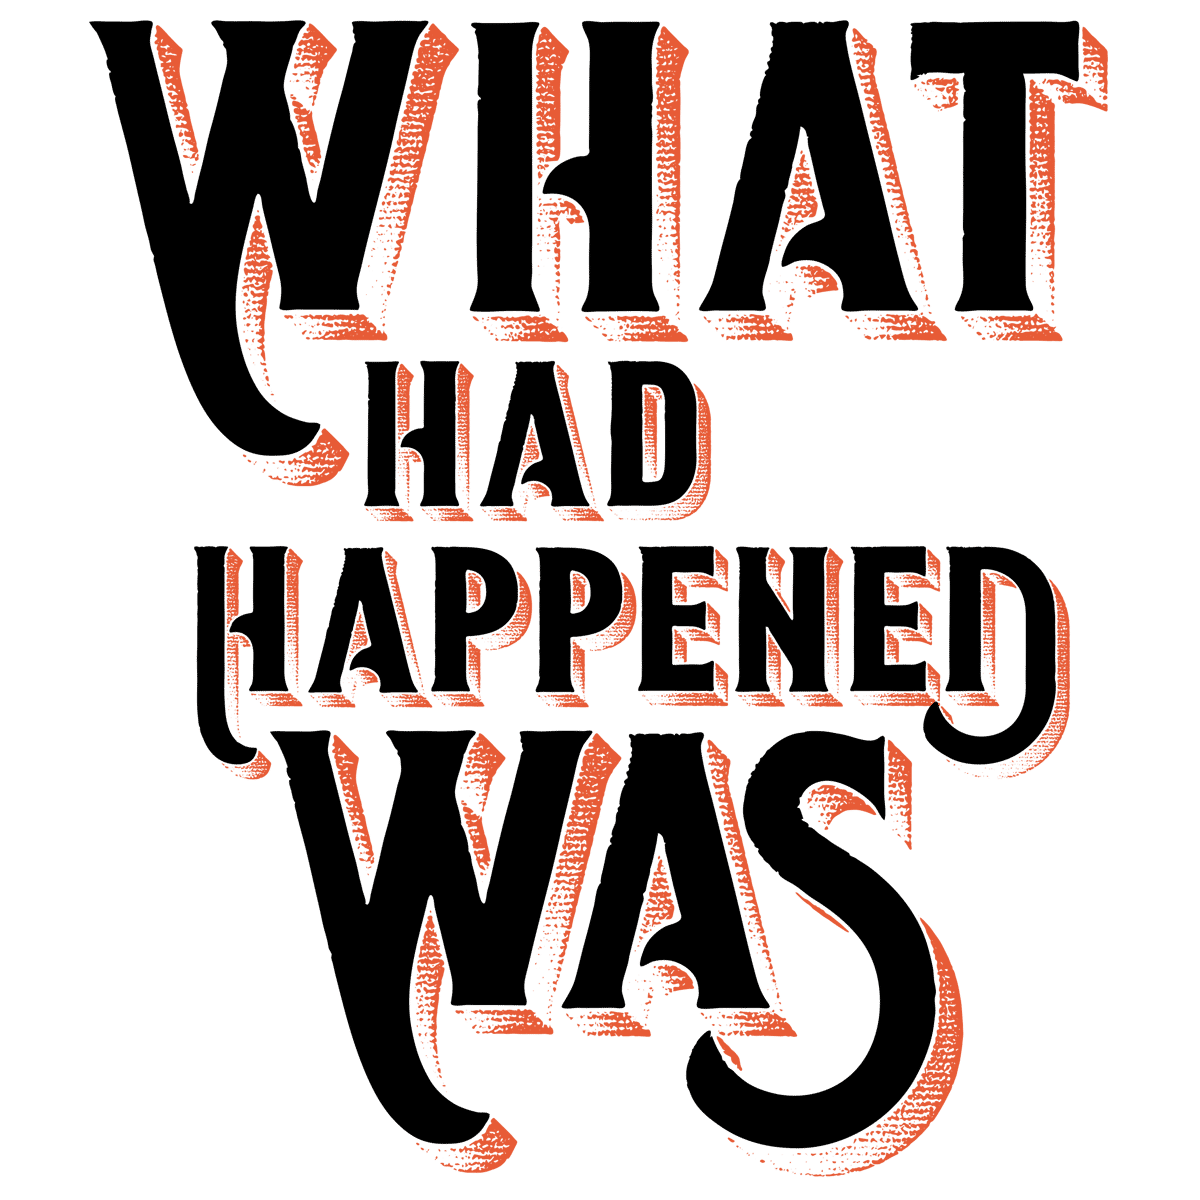 see what had happened was movie quote